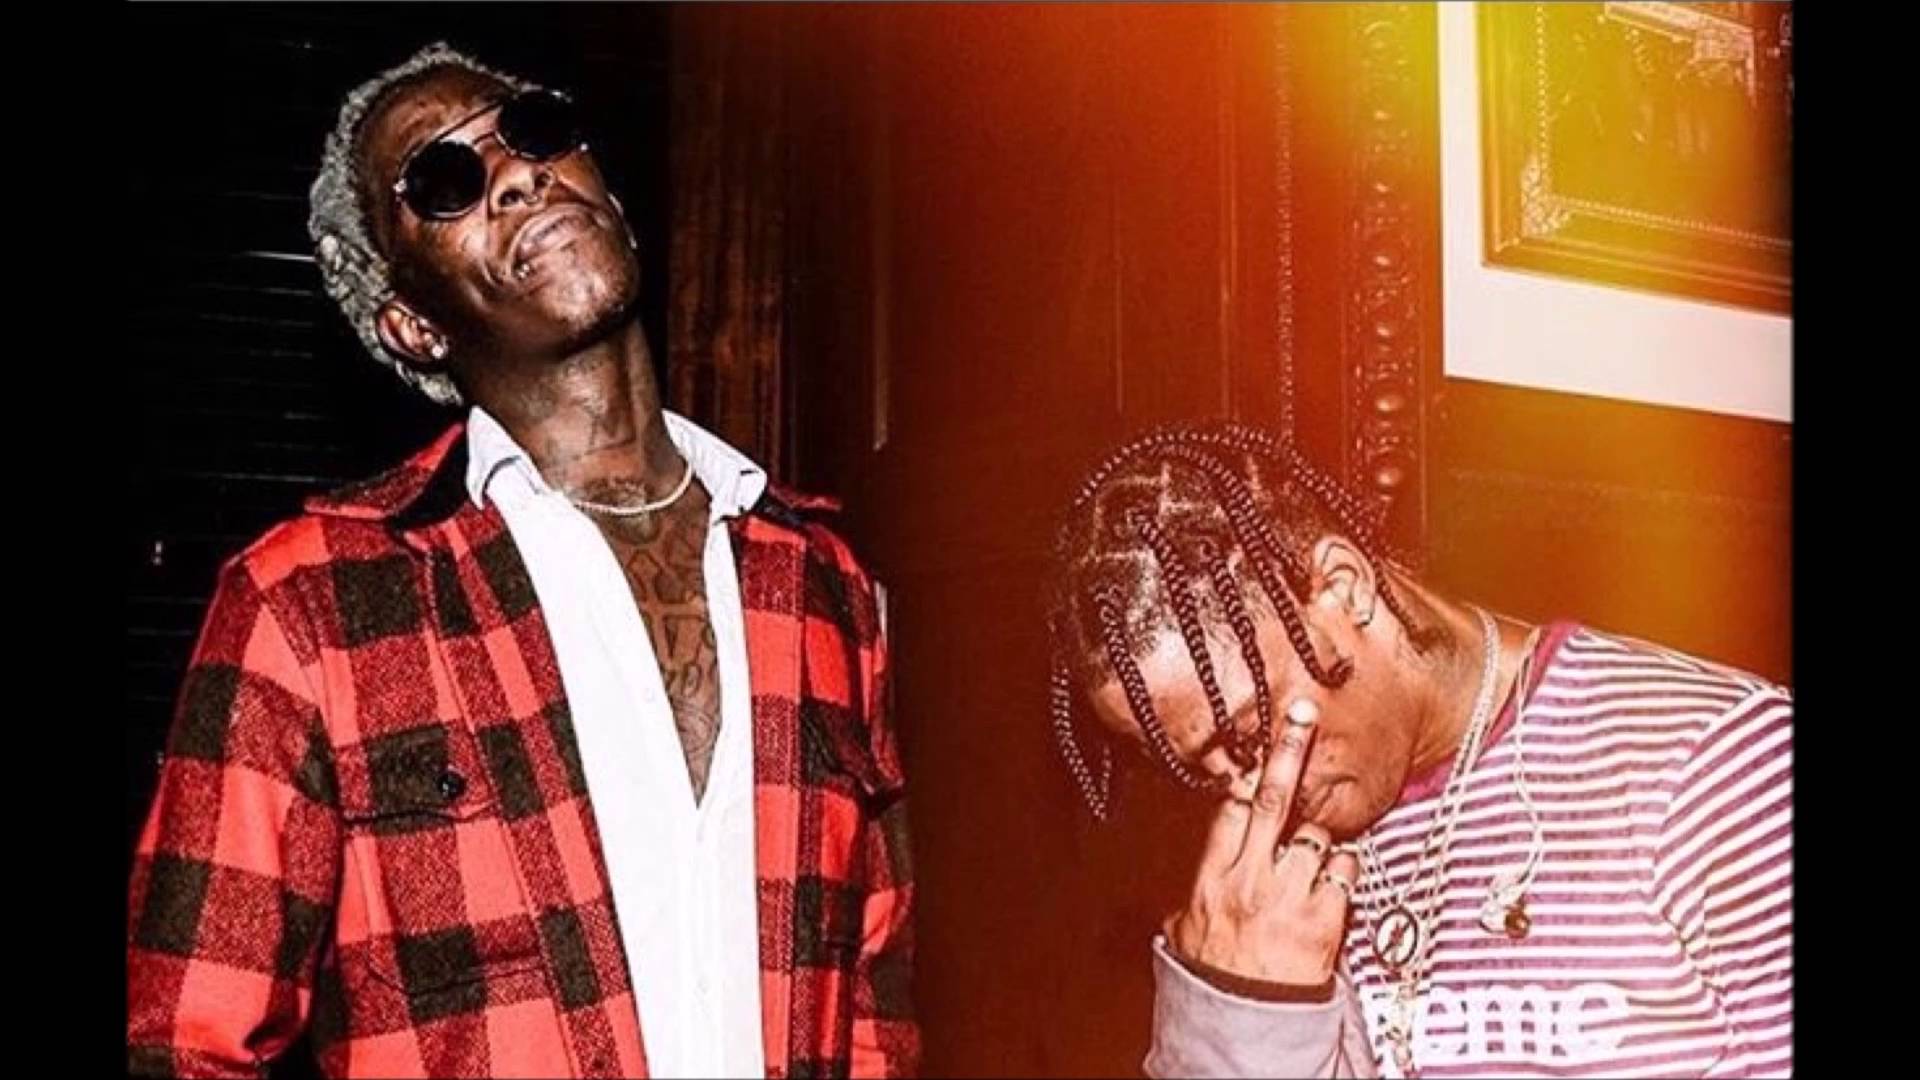 Hear Young Thug and Travis Scott team up on Pick Up The Phone